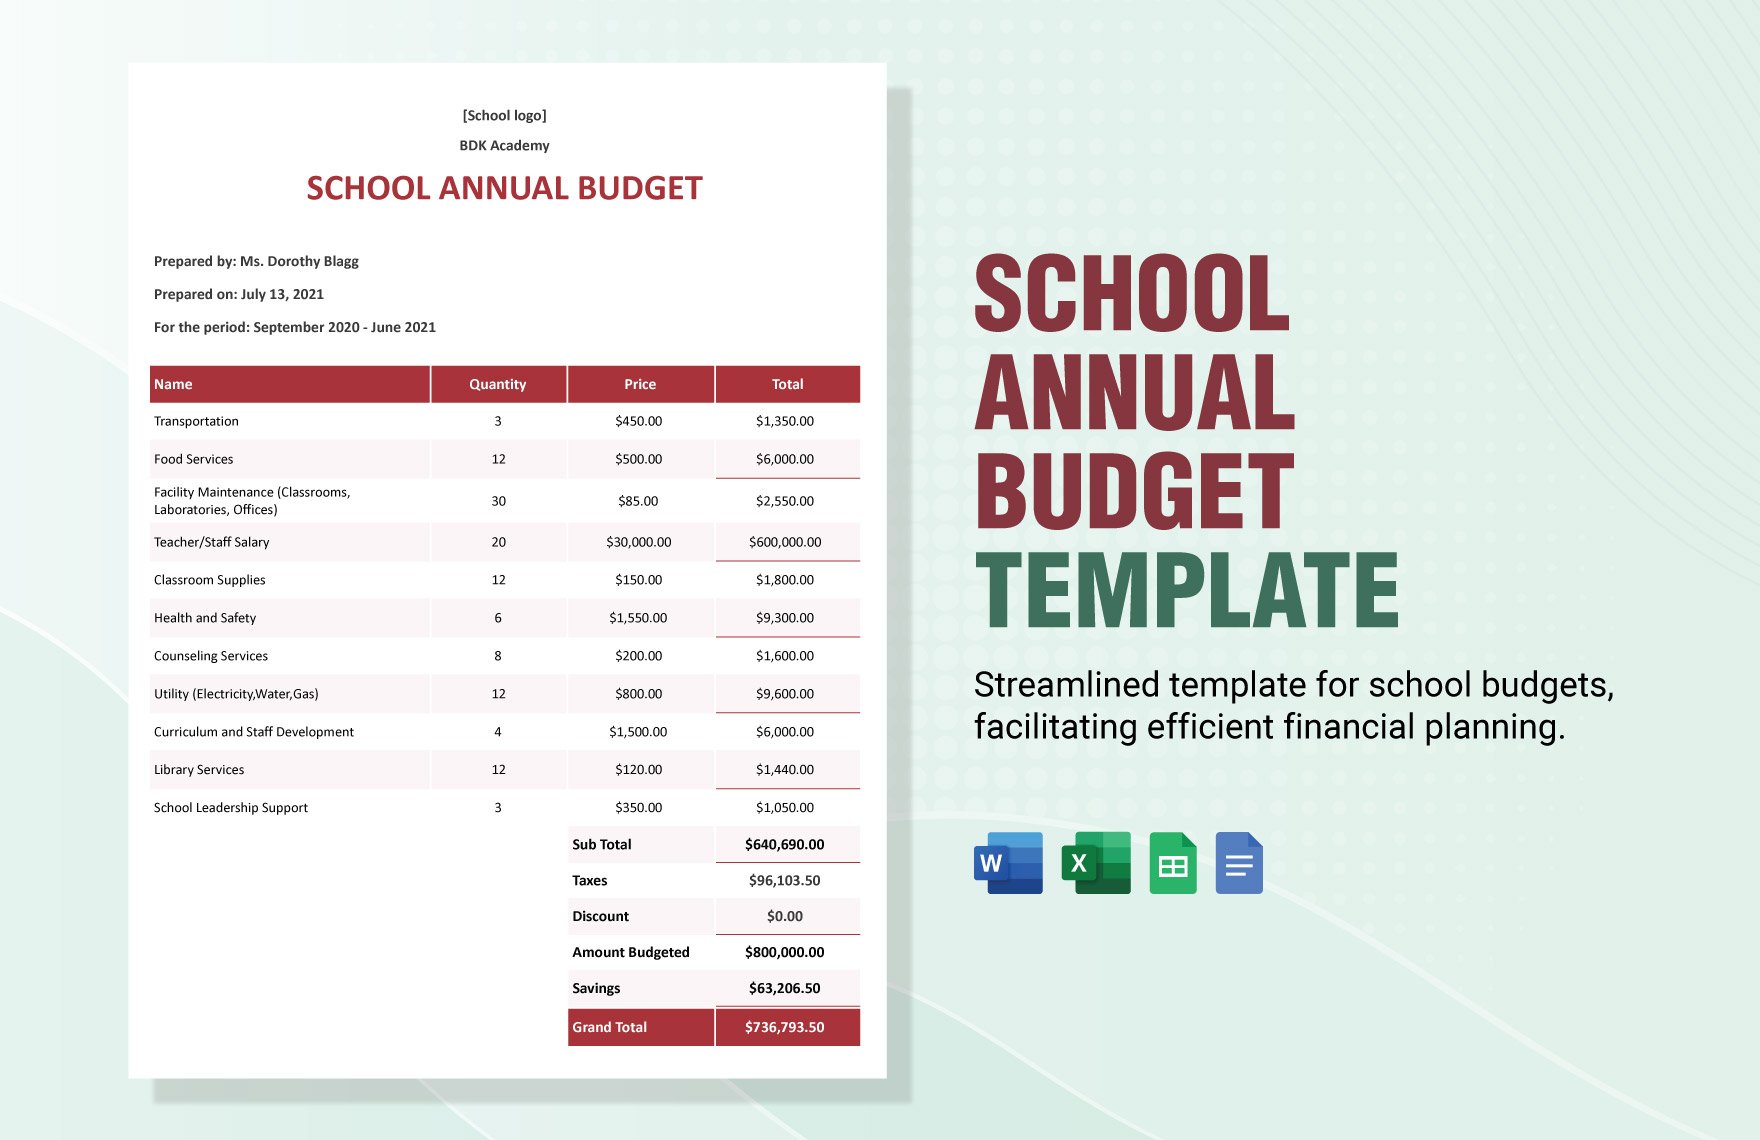 School Annual Budget Template in Word, Google Docs, Excel, Google Sheets